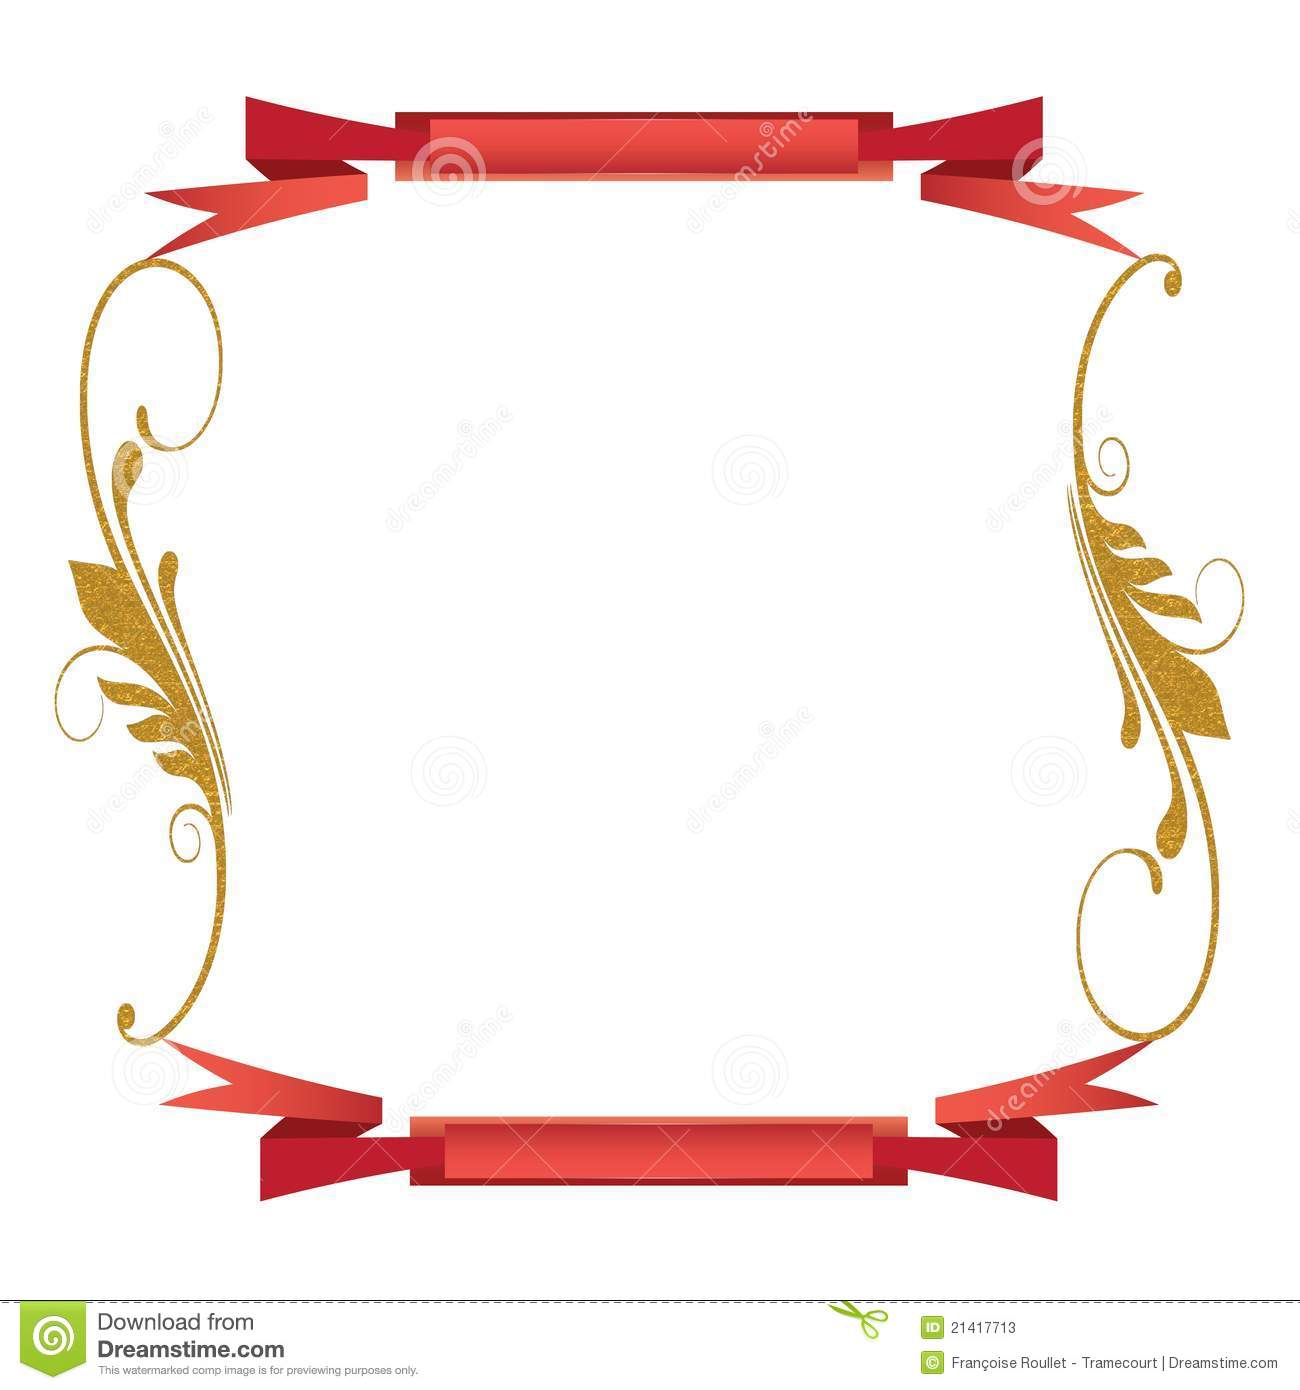 White Background With Big Red Scrolls And Gold Swirls